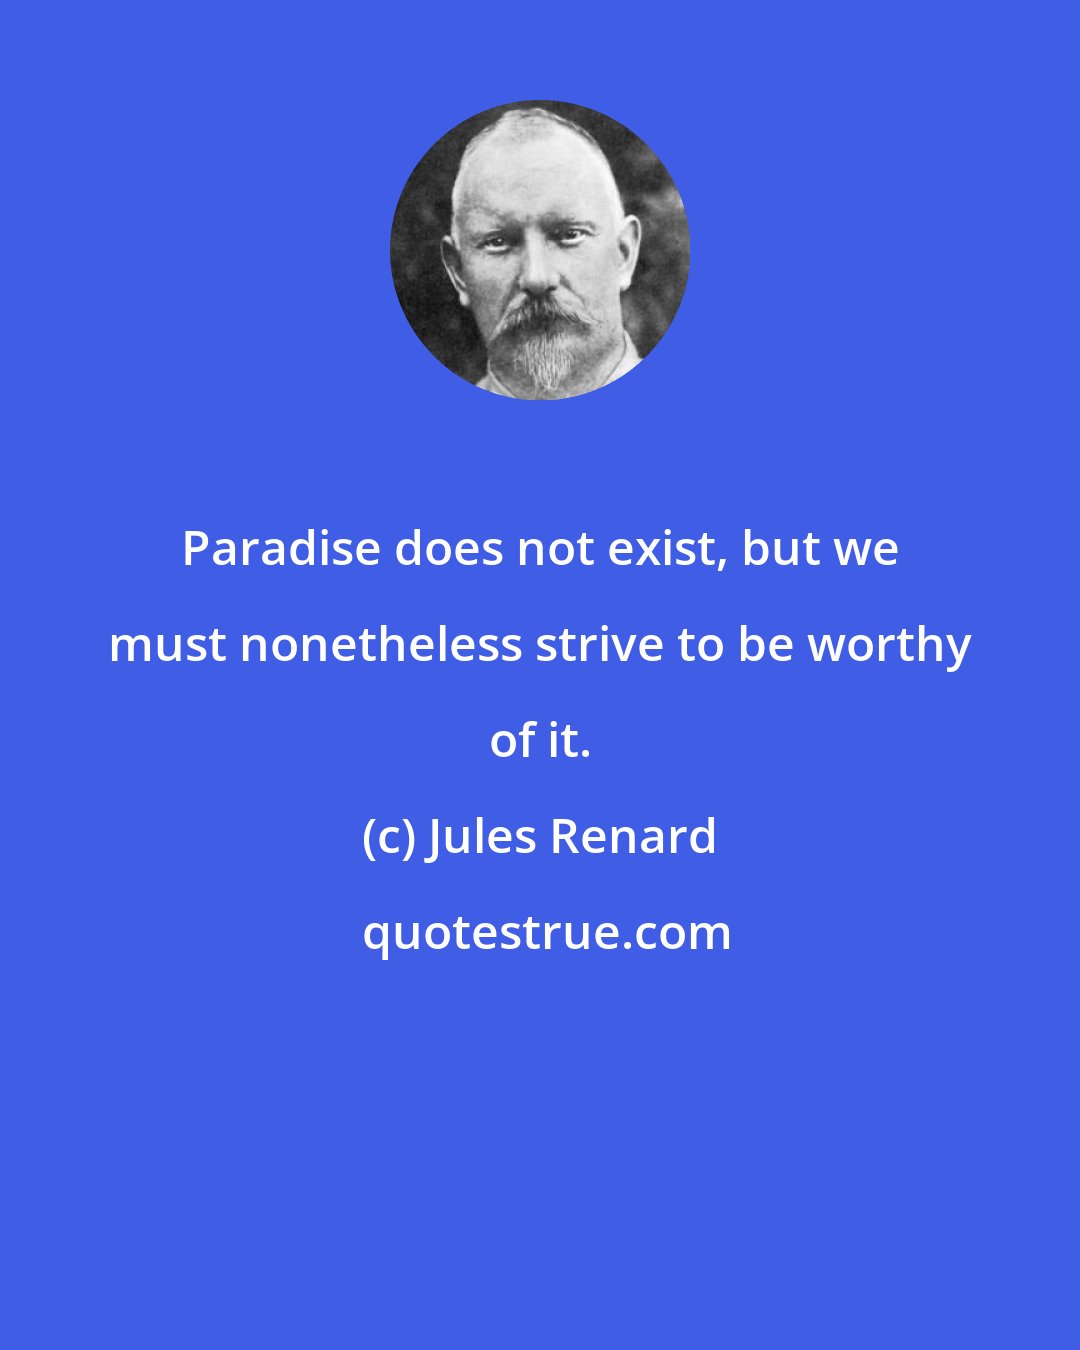 Jules Renard: Paradise does not exist, but we must nonetheless strive to be worthy of it.